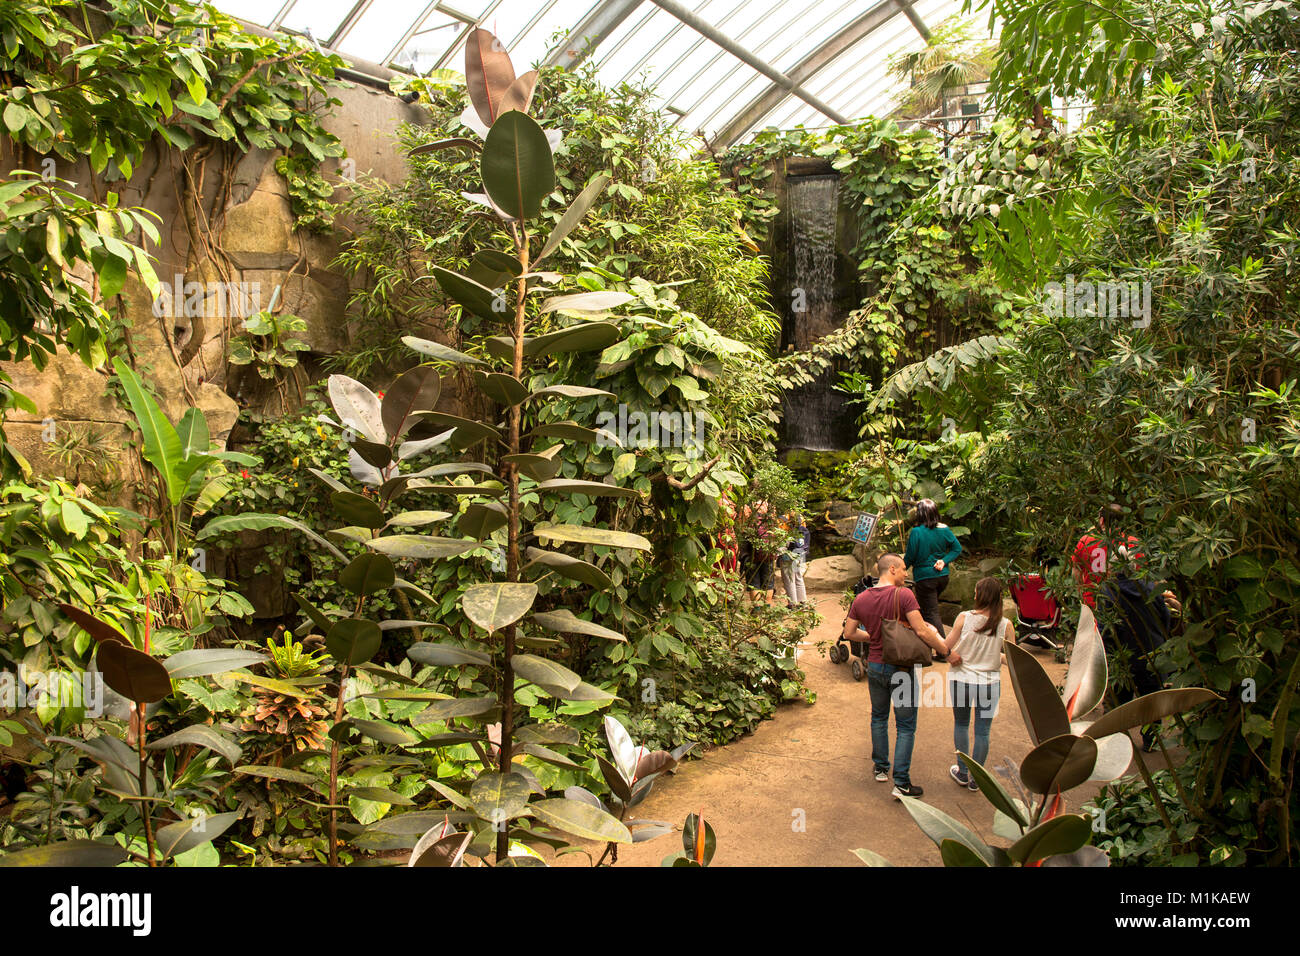 Germany, Cologne, the tropical house at the zoo.  Deutschland, Koeln, das Tropenhaus im Zoo. Stock Photo